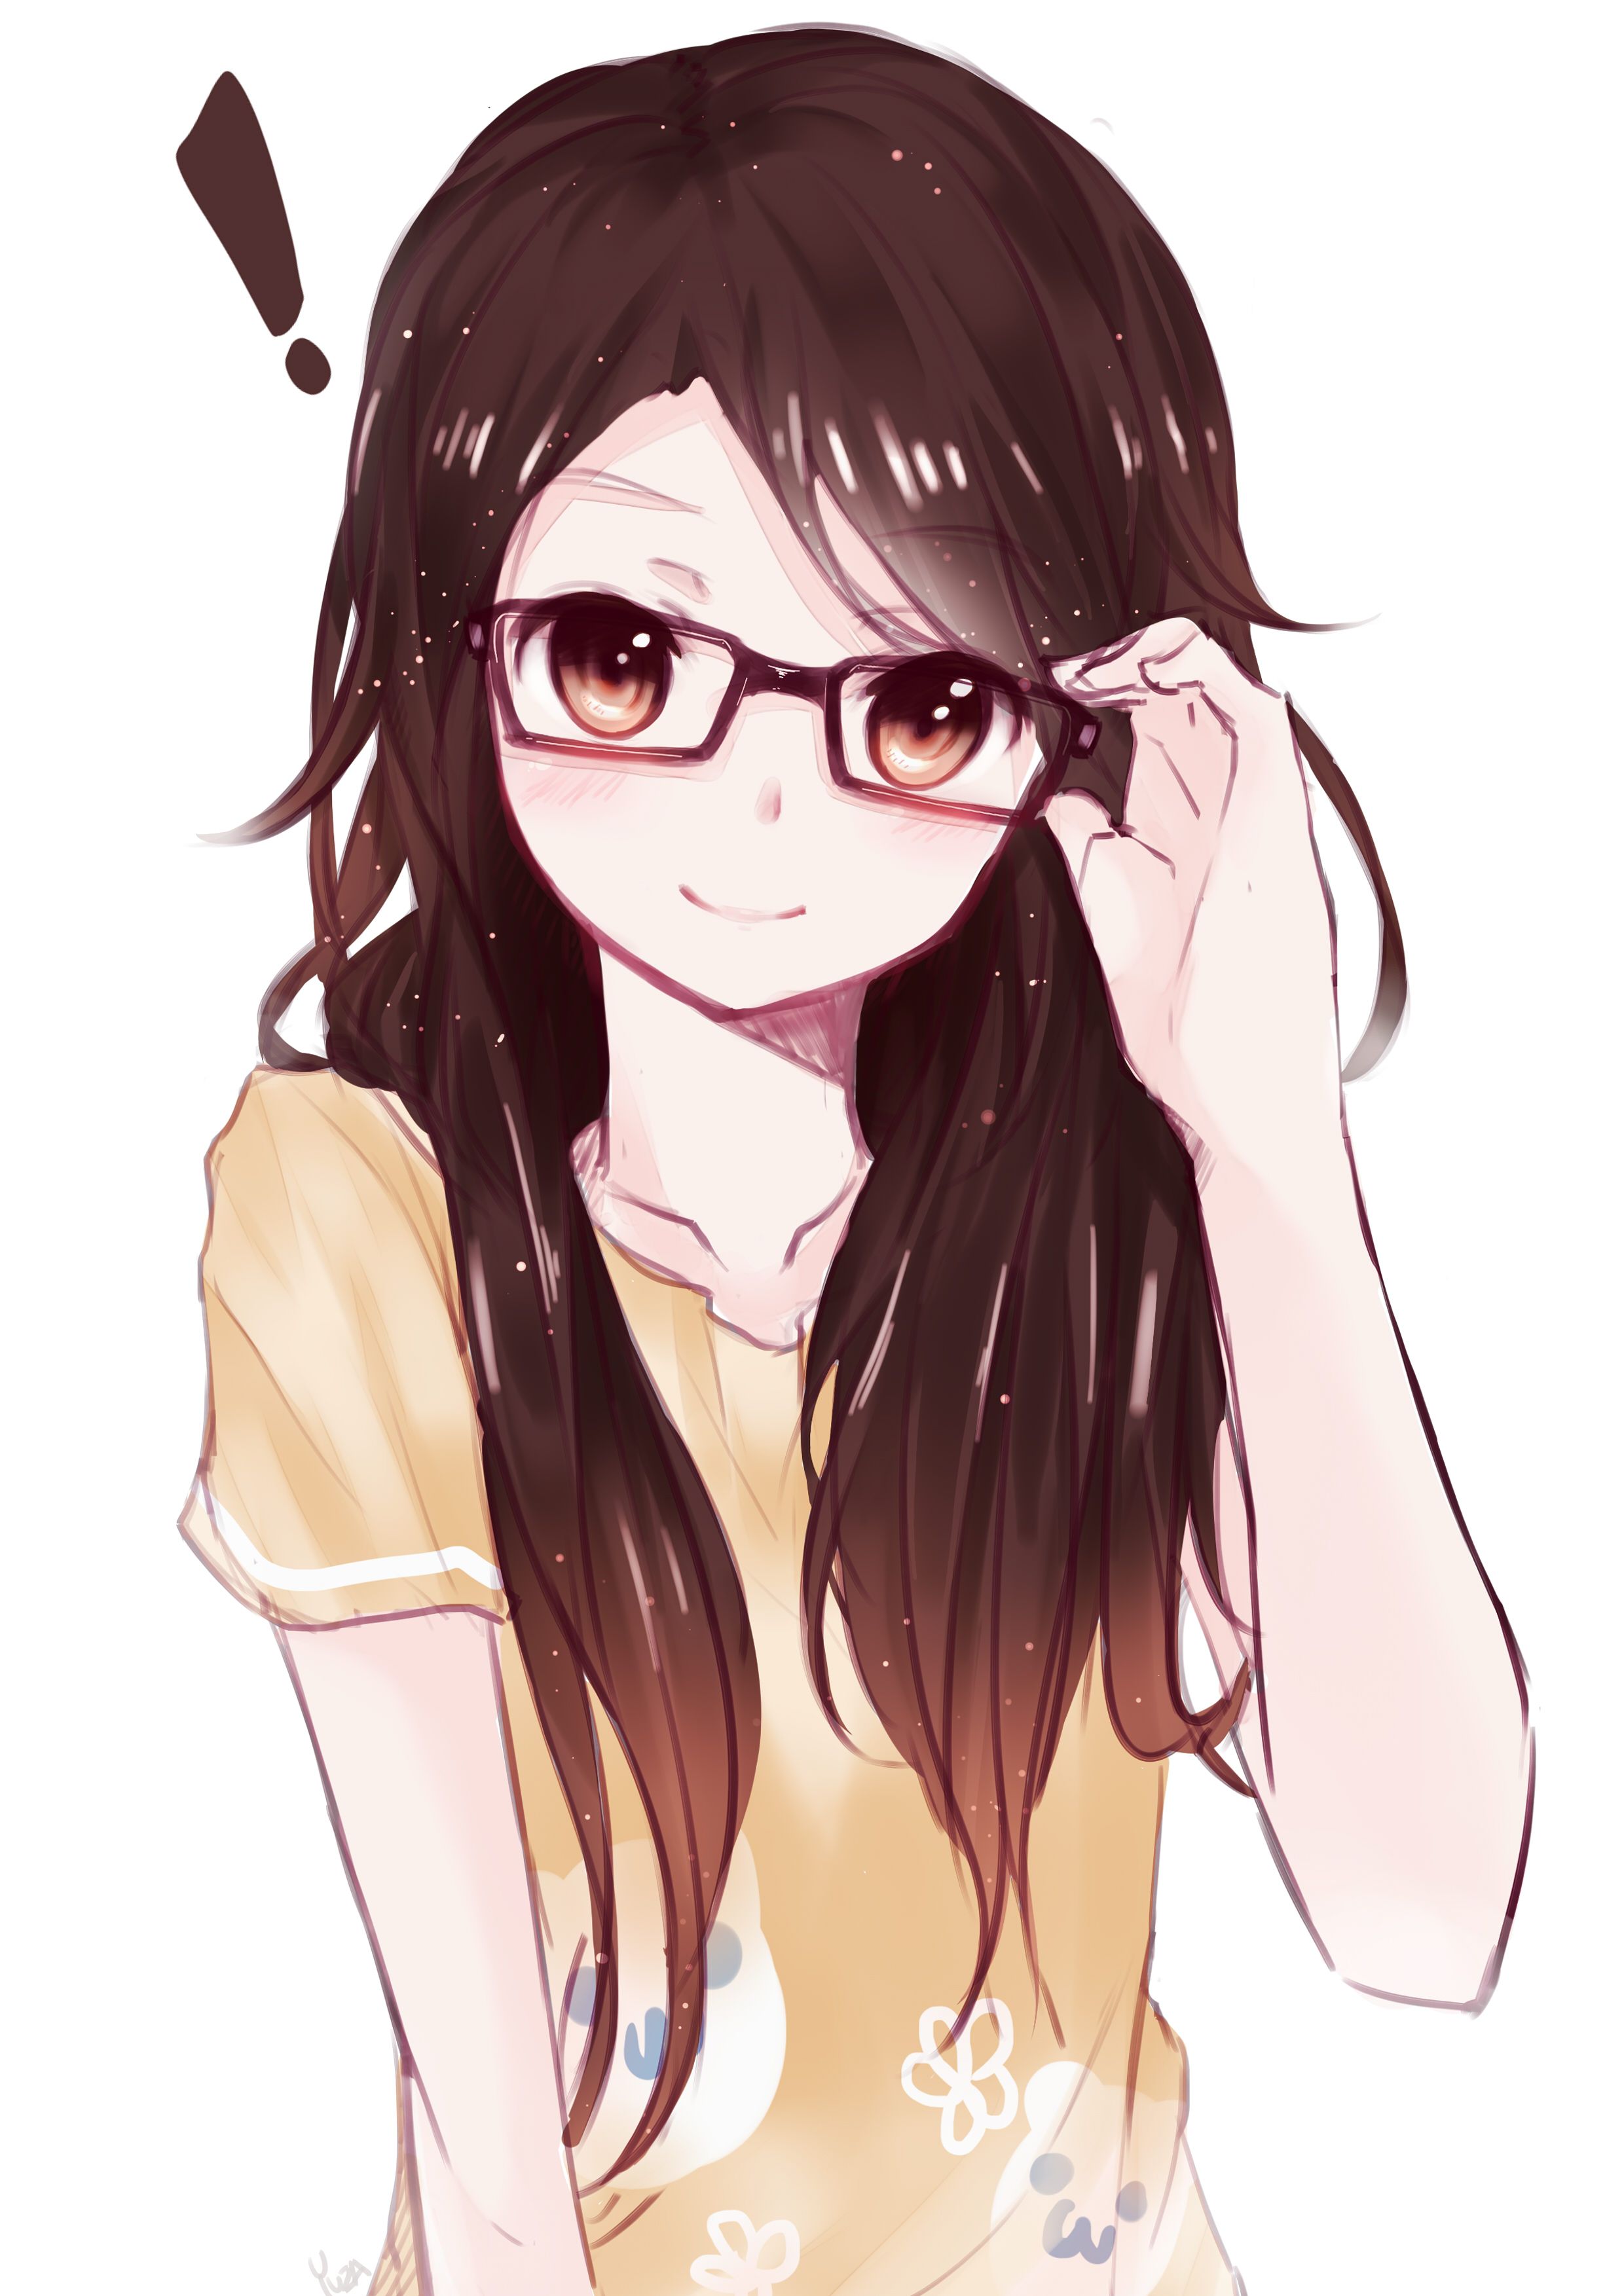 Anime girl with glasses - Wallpaper Cave